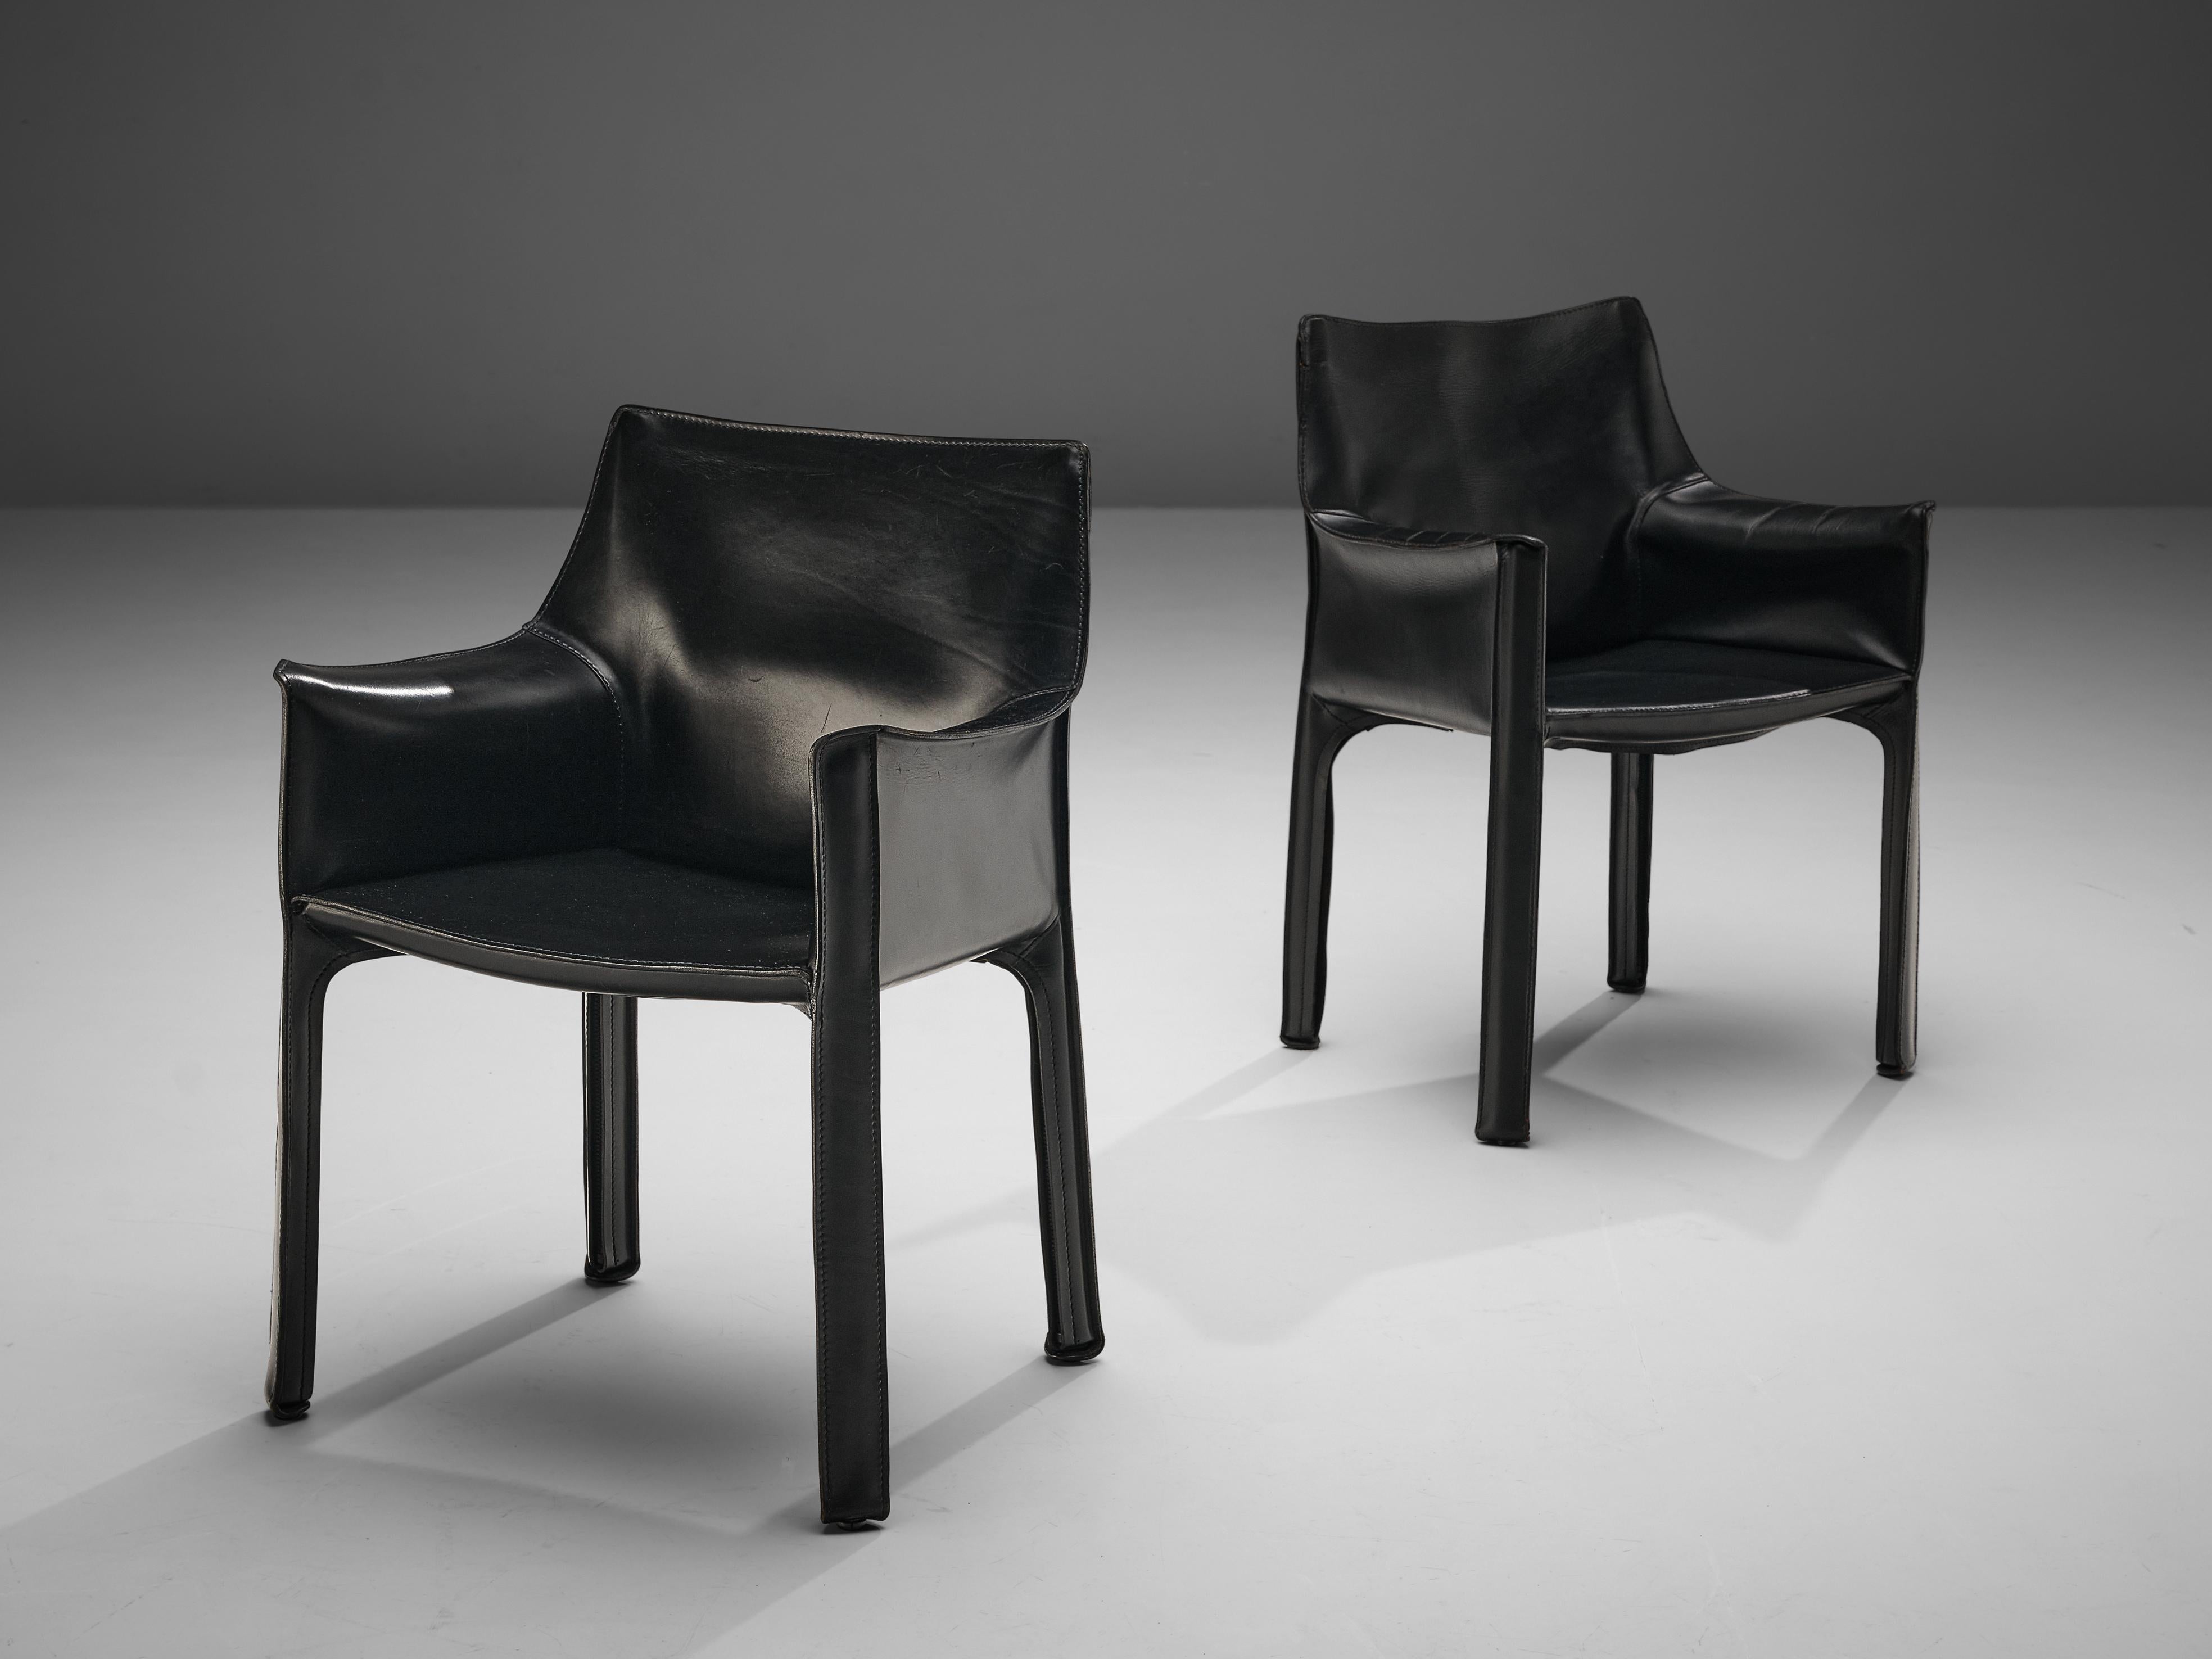 Mario Bellini for Cassina, pair of armchairs model ‘CAB 413’, leather, plastic, Italy, design 1979

The iconic ‘CAB’ chairs were designed by Mario Bellini in 1979. Conceptually new was the way Bellini uses leather to cover the whole chair in one